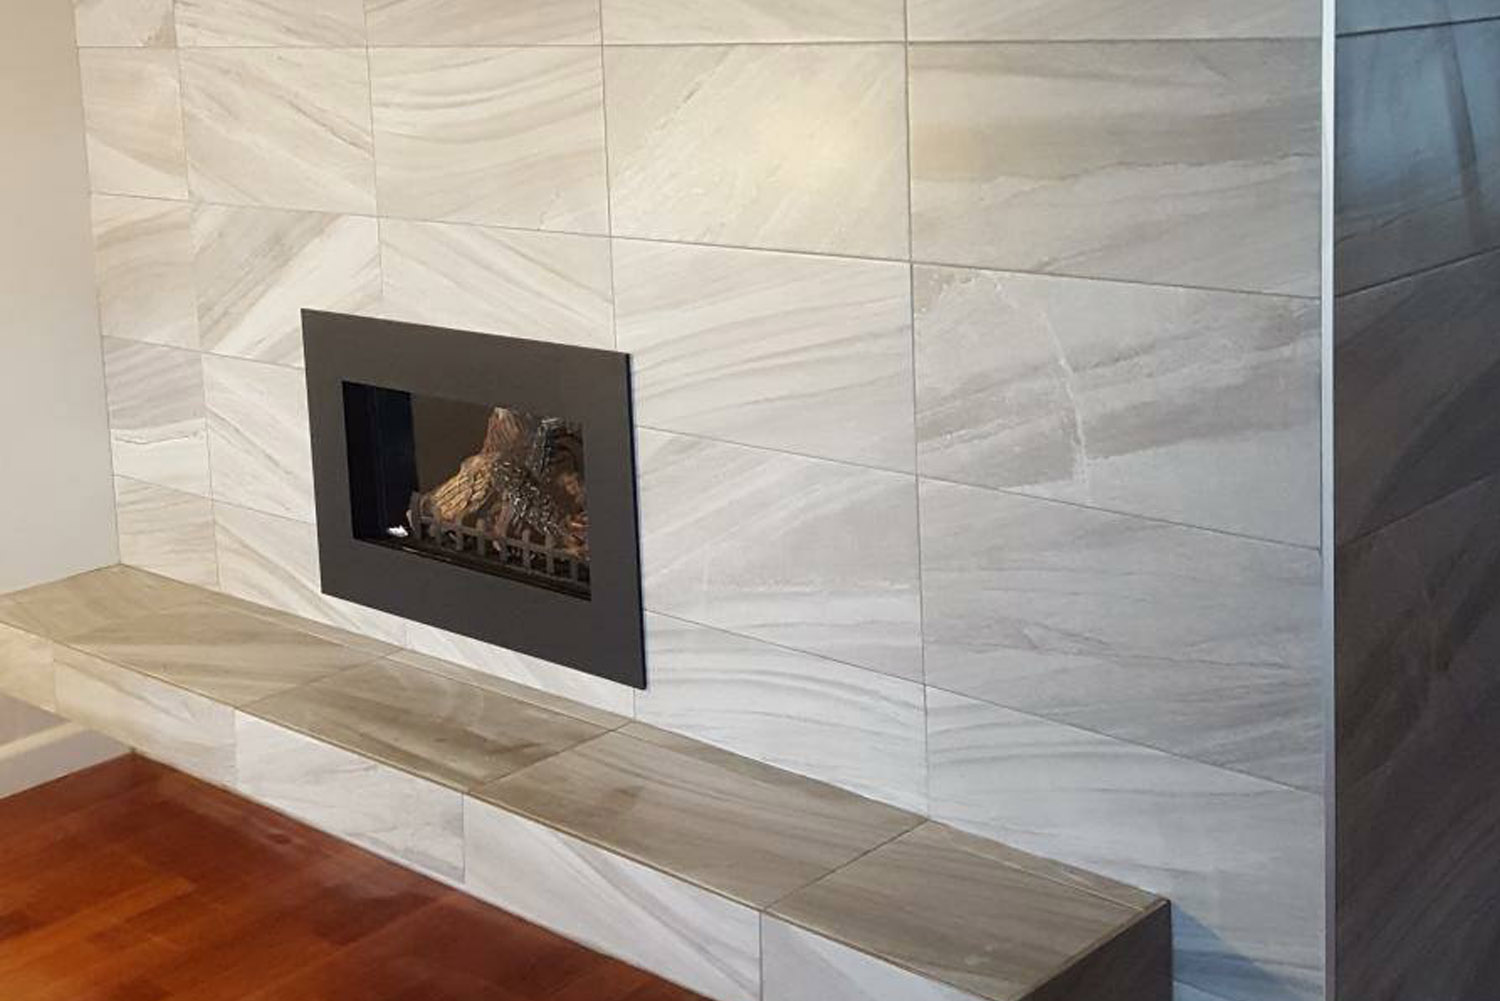 Keep your space warm and elegant with a custom fireplace